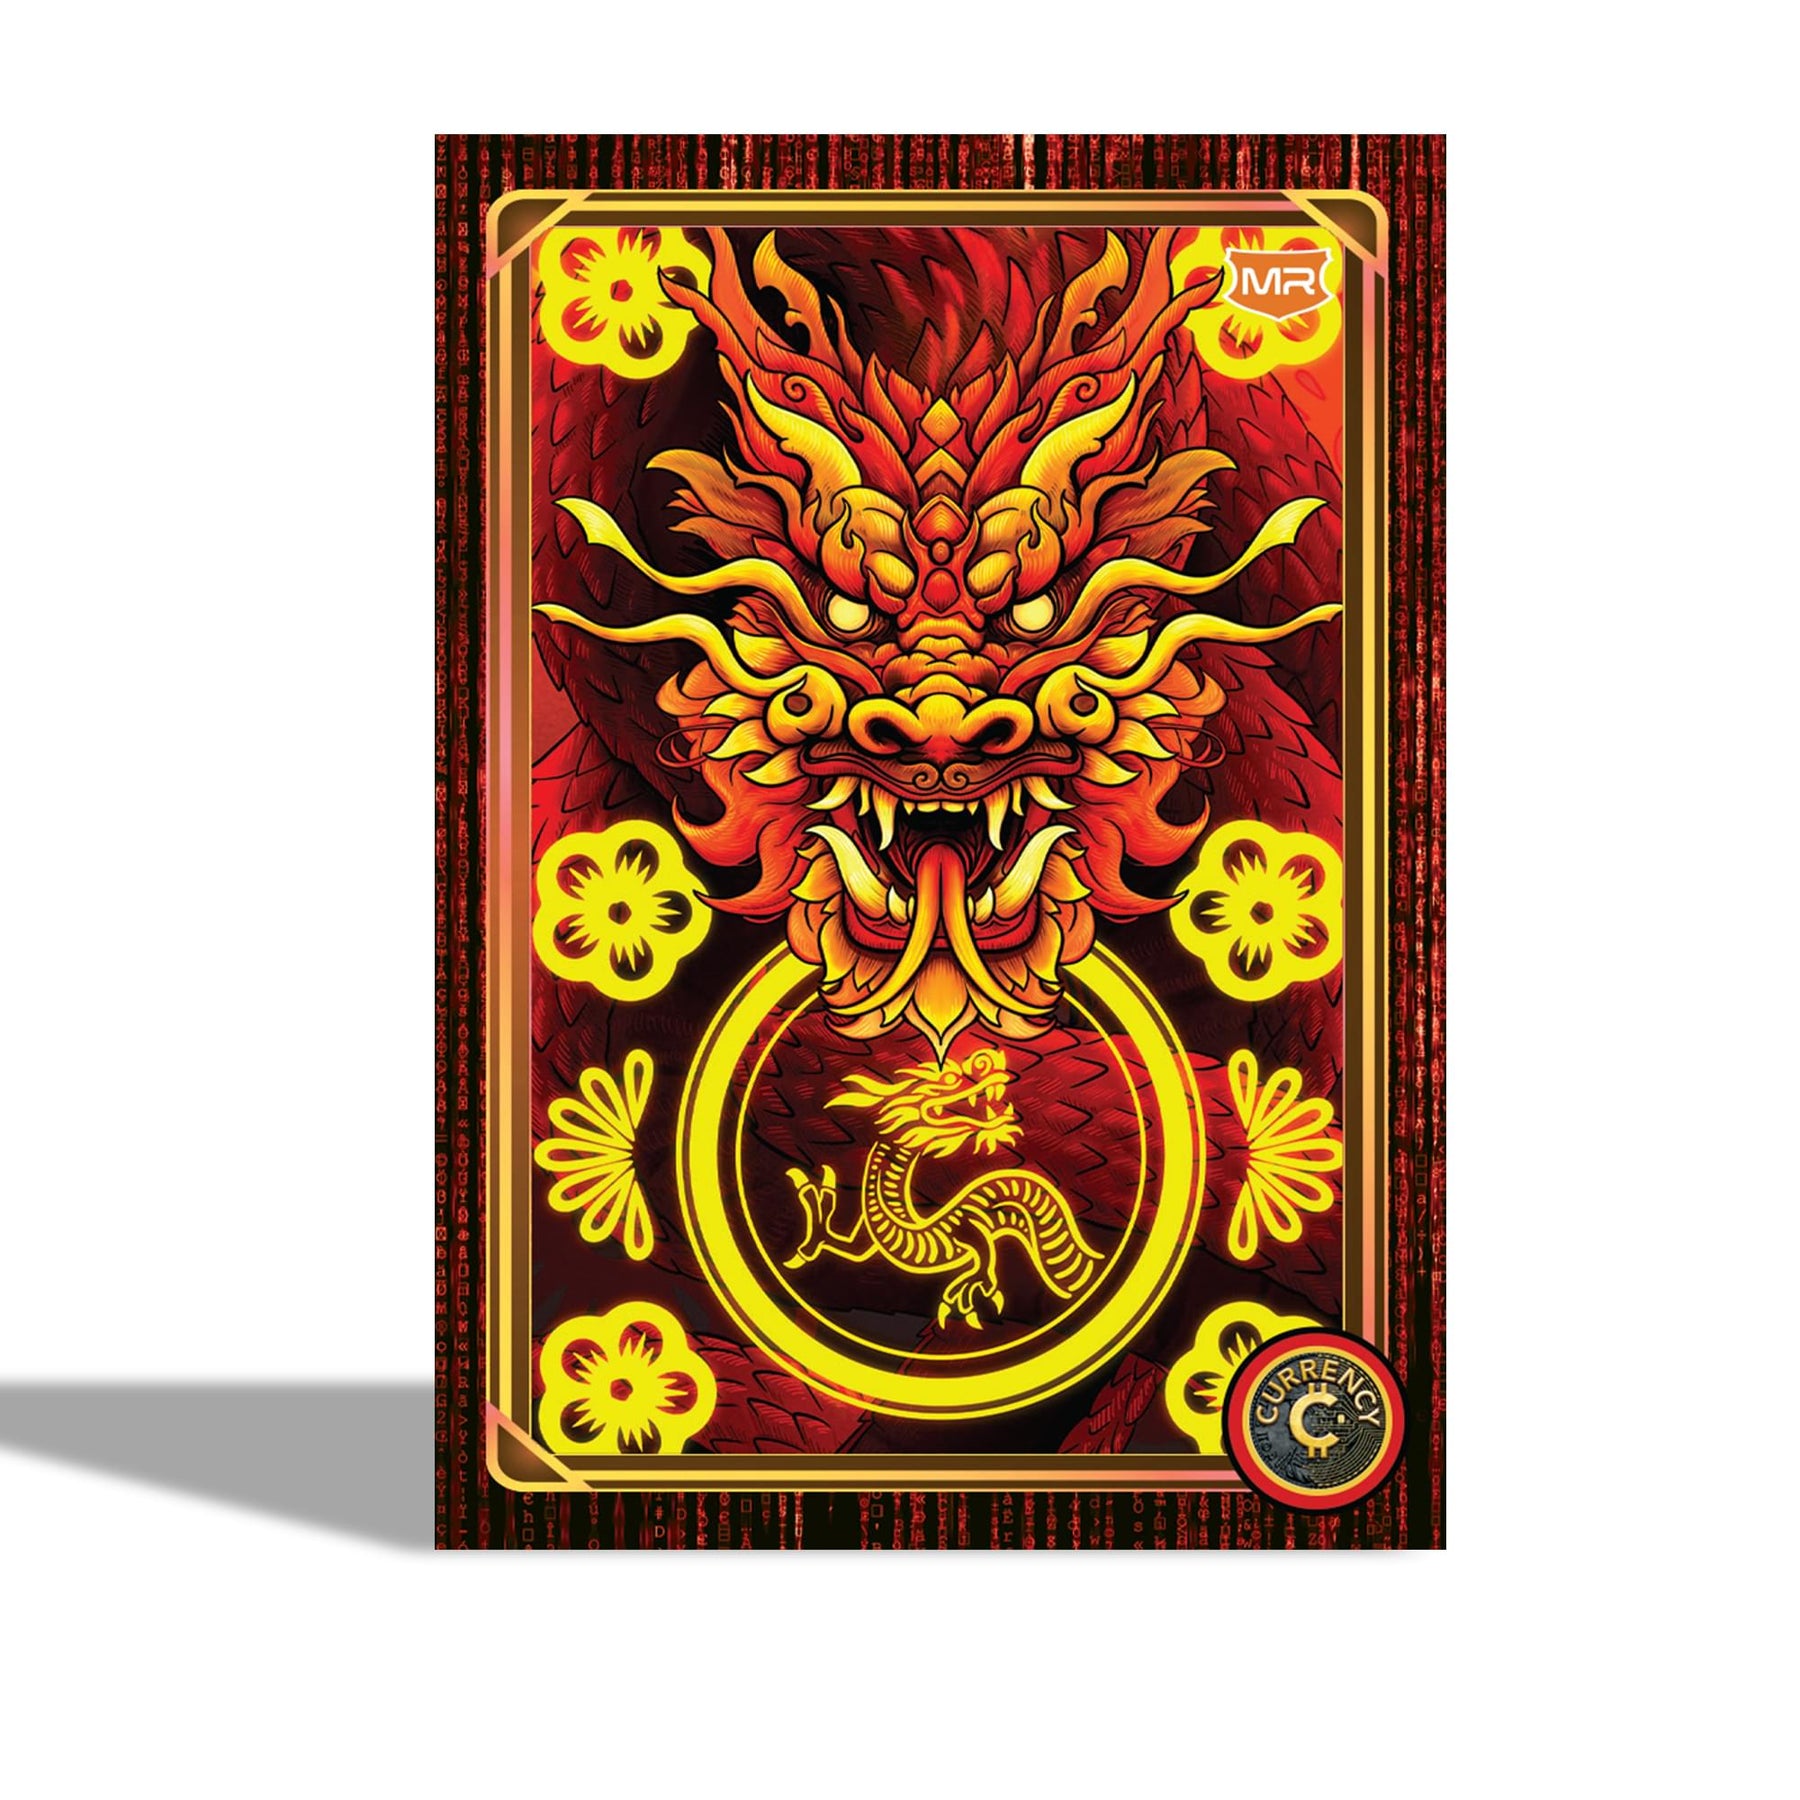 Currency Series 3 Trading Cards Master Case | 48 Collector Boxes